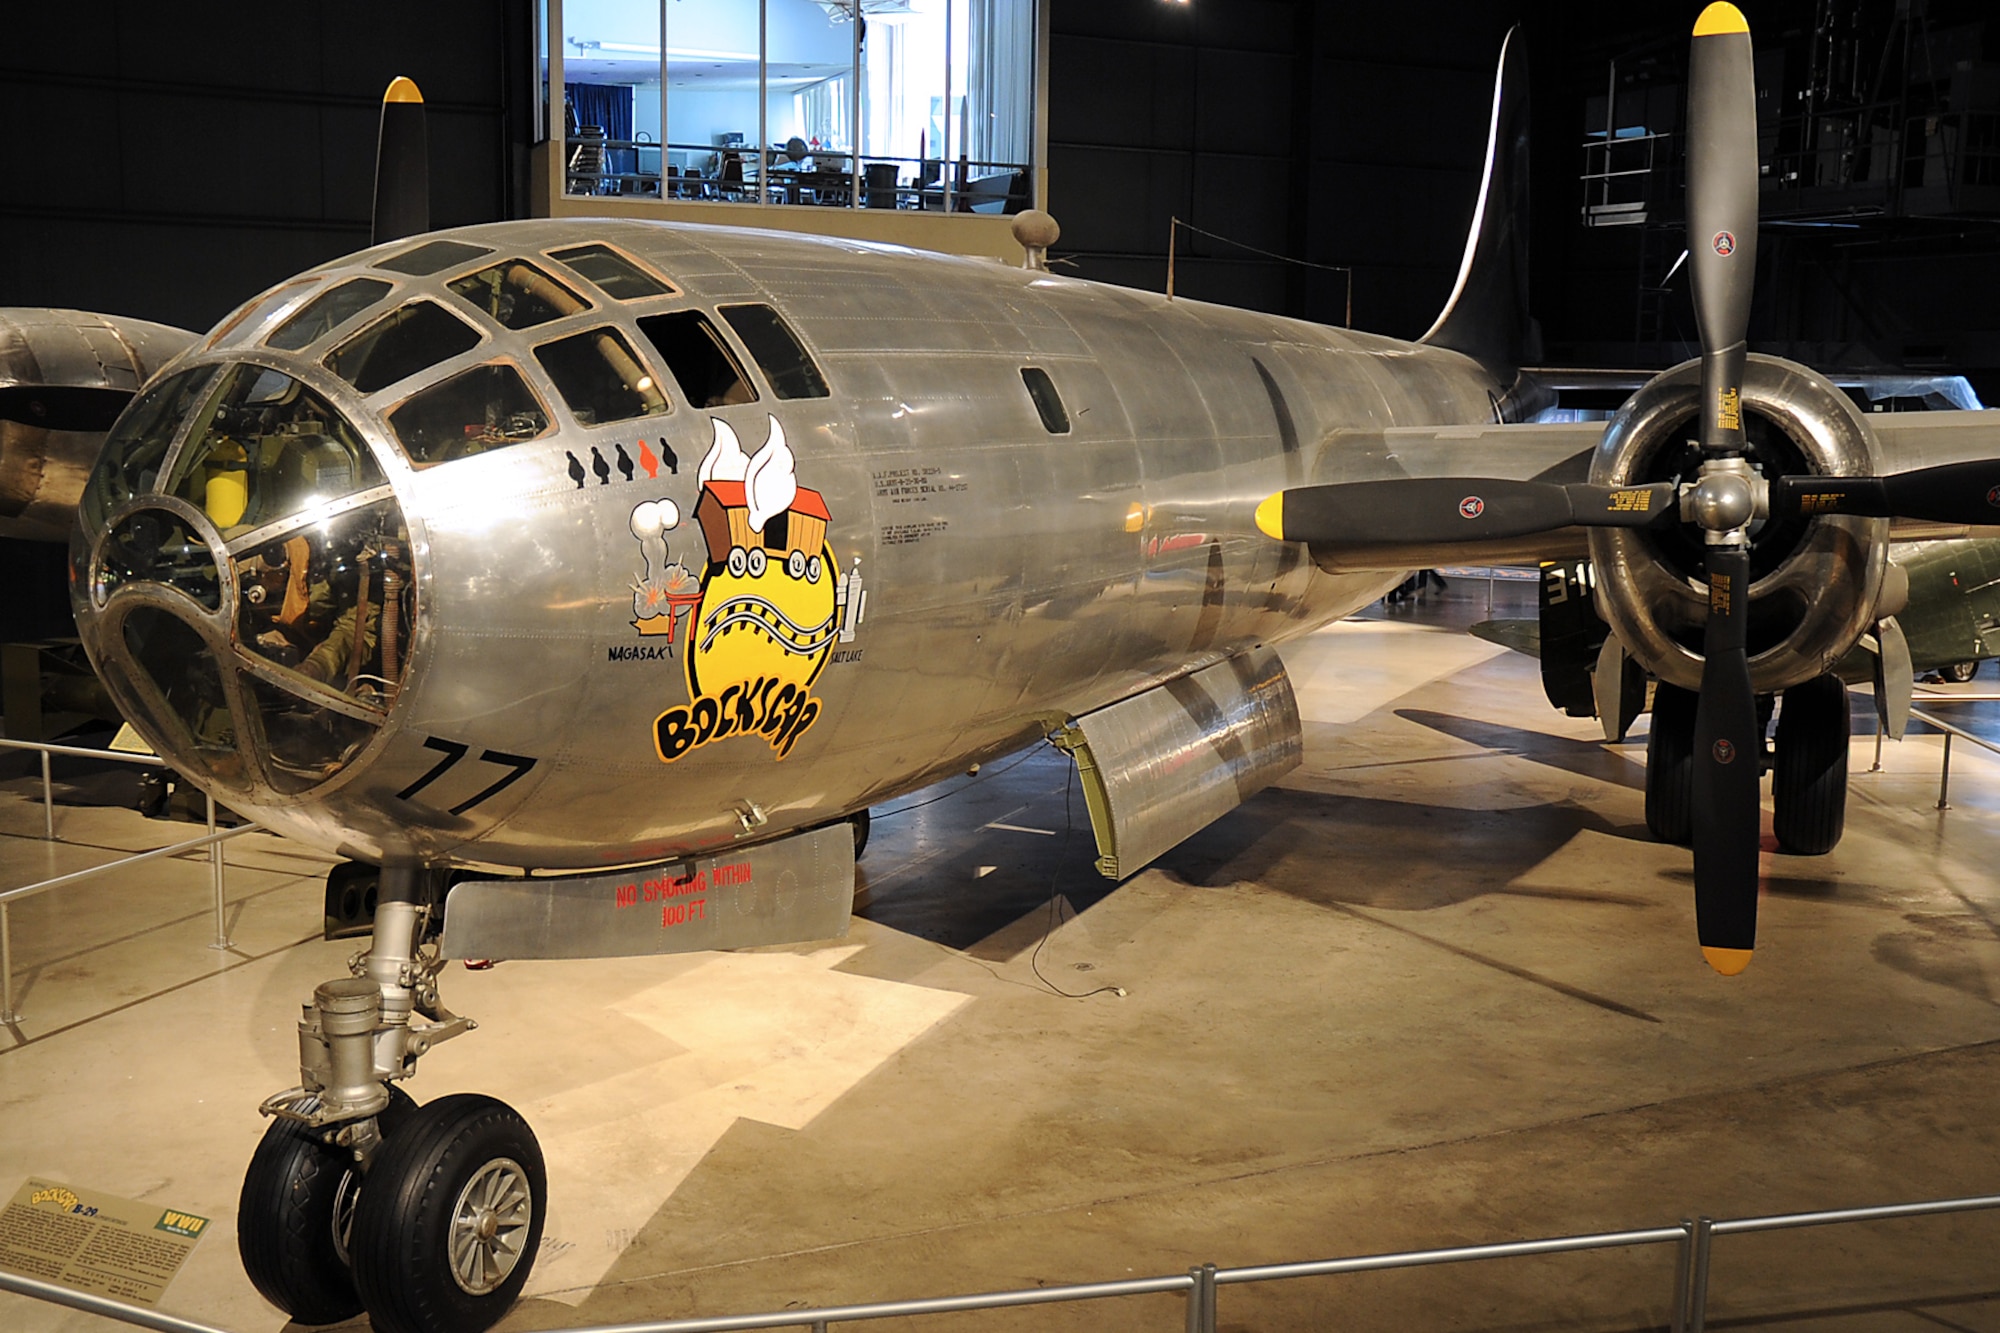 DAYTON, Ohio -- Boeing B-29 Superfortress "Bockscar" in the World War II Gallery at the National Museum of the United States Air Force. (U.S. Air Force photo by Ken LaRock)